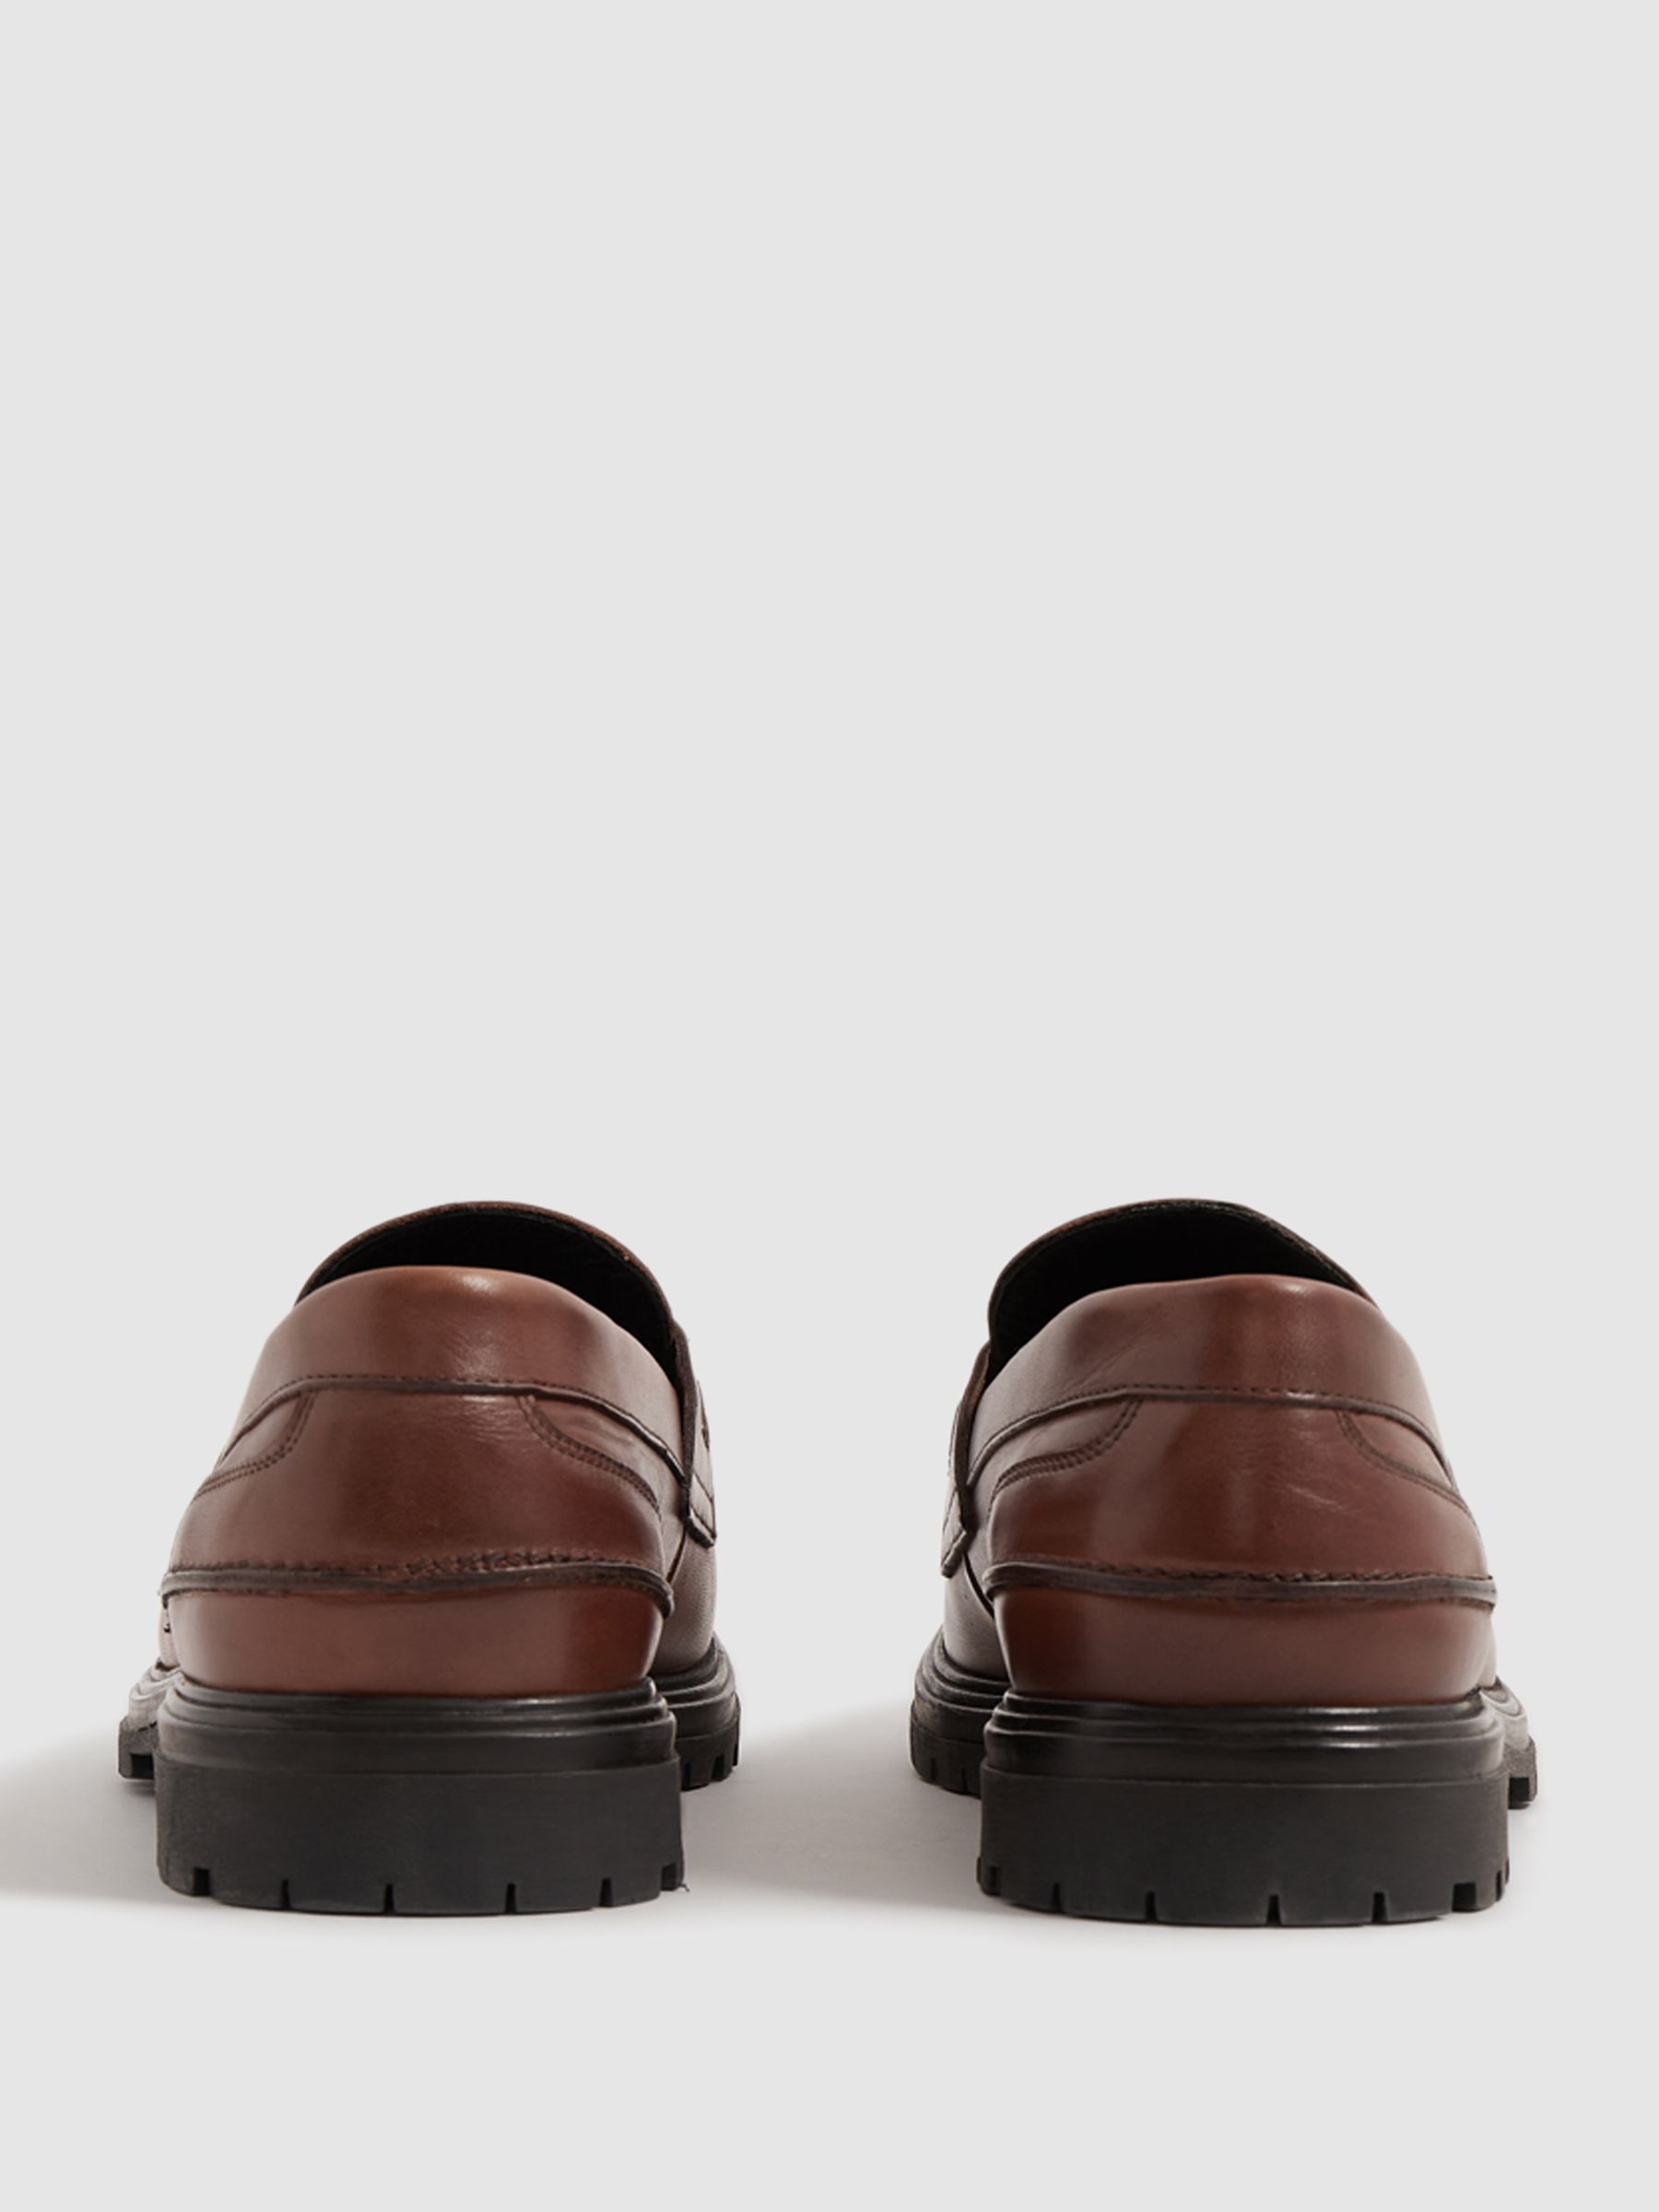 Reiss Cambridge Casual Leather Loafers - REISS